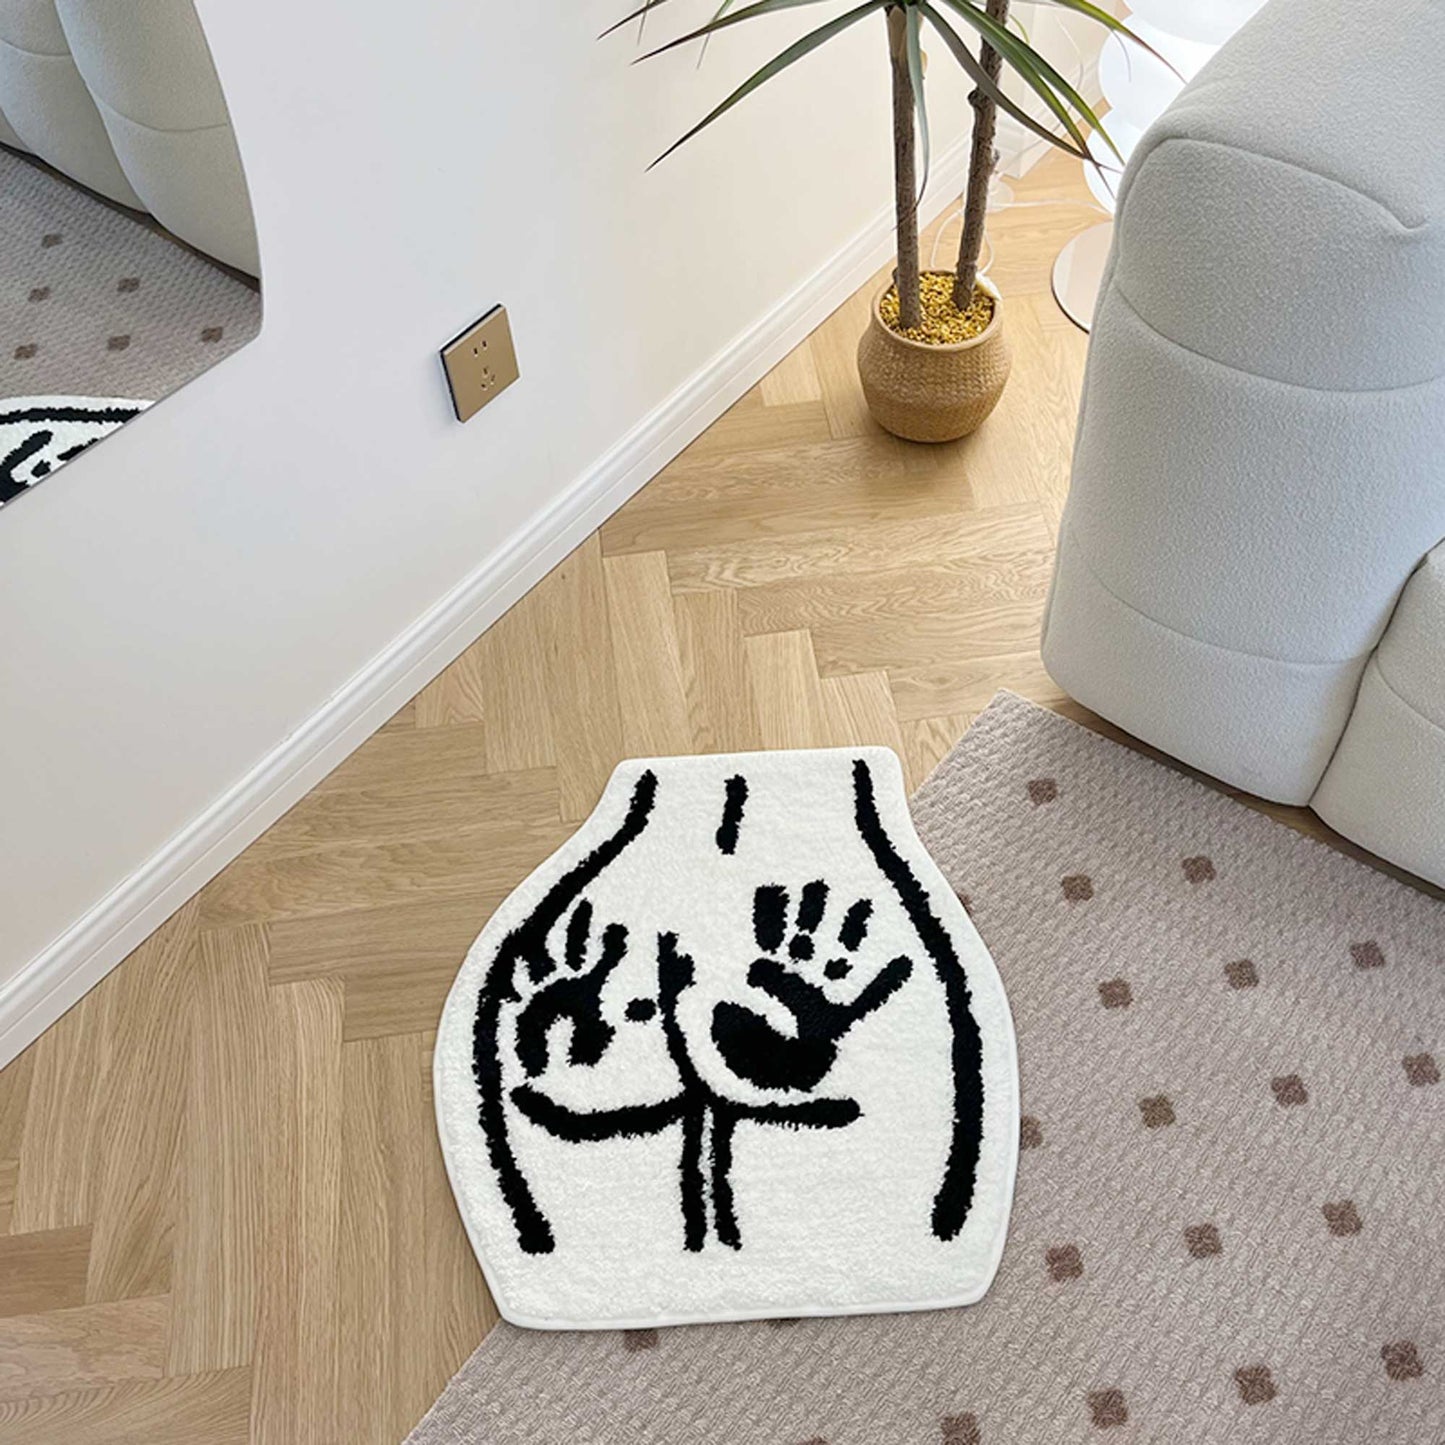 Tufted Rug Handprint on Booty Rug Front in a Living Room